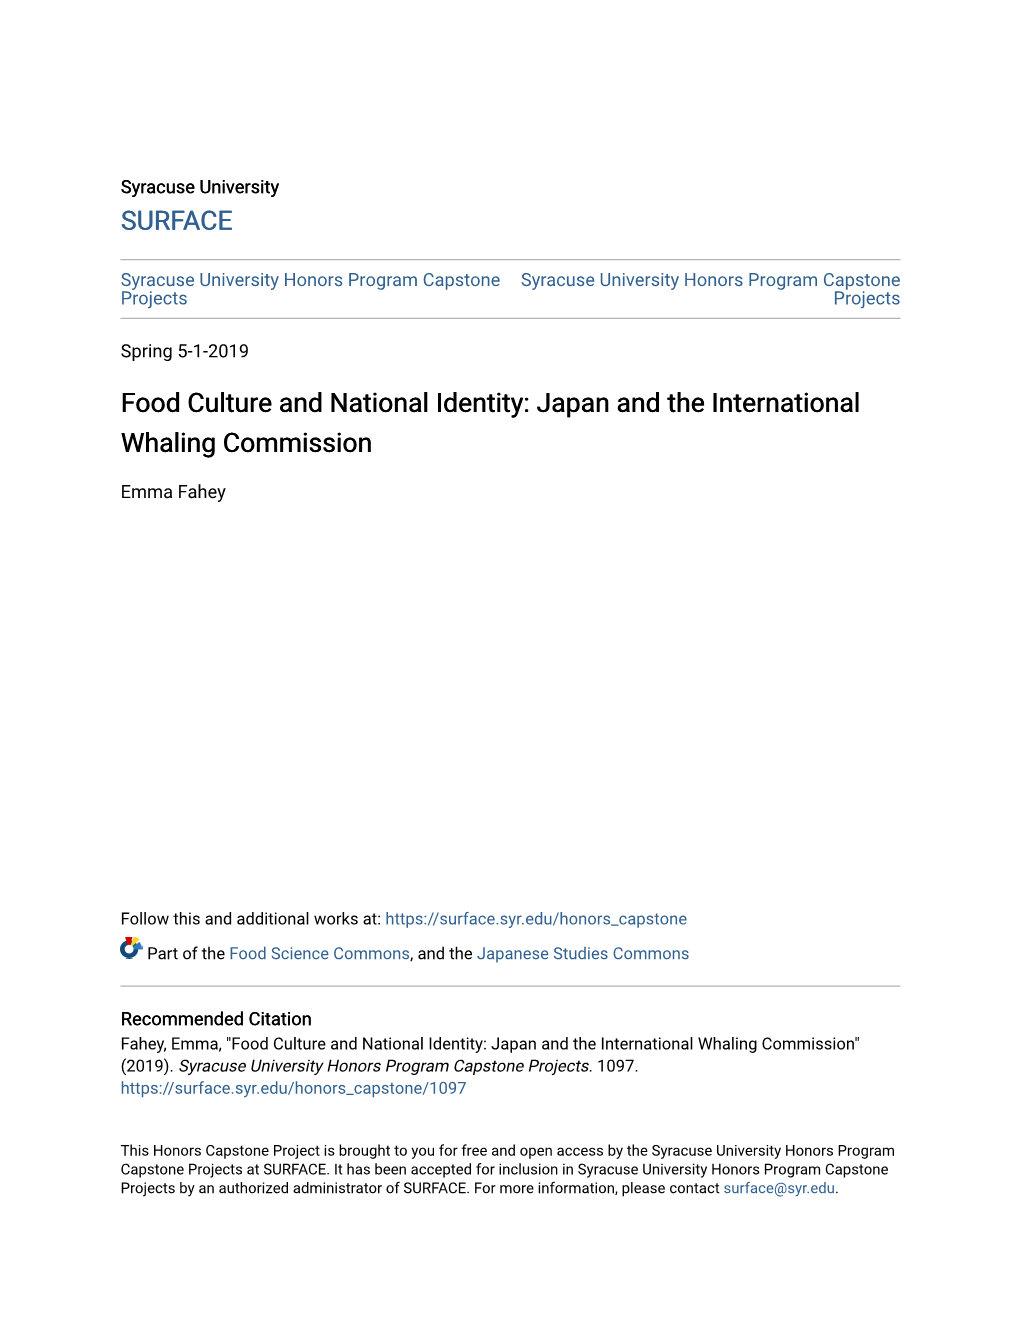 Food Culture and National Identity: Japan and the International Whaling Commission